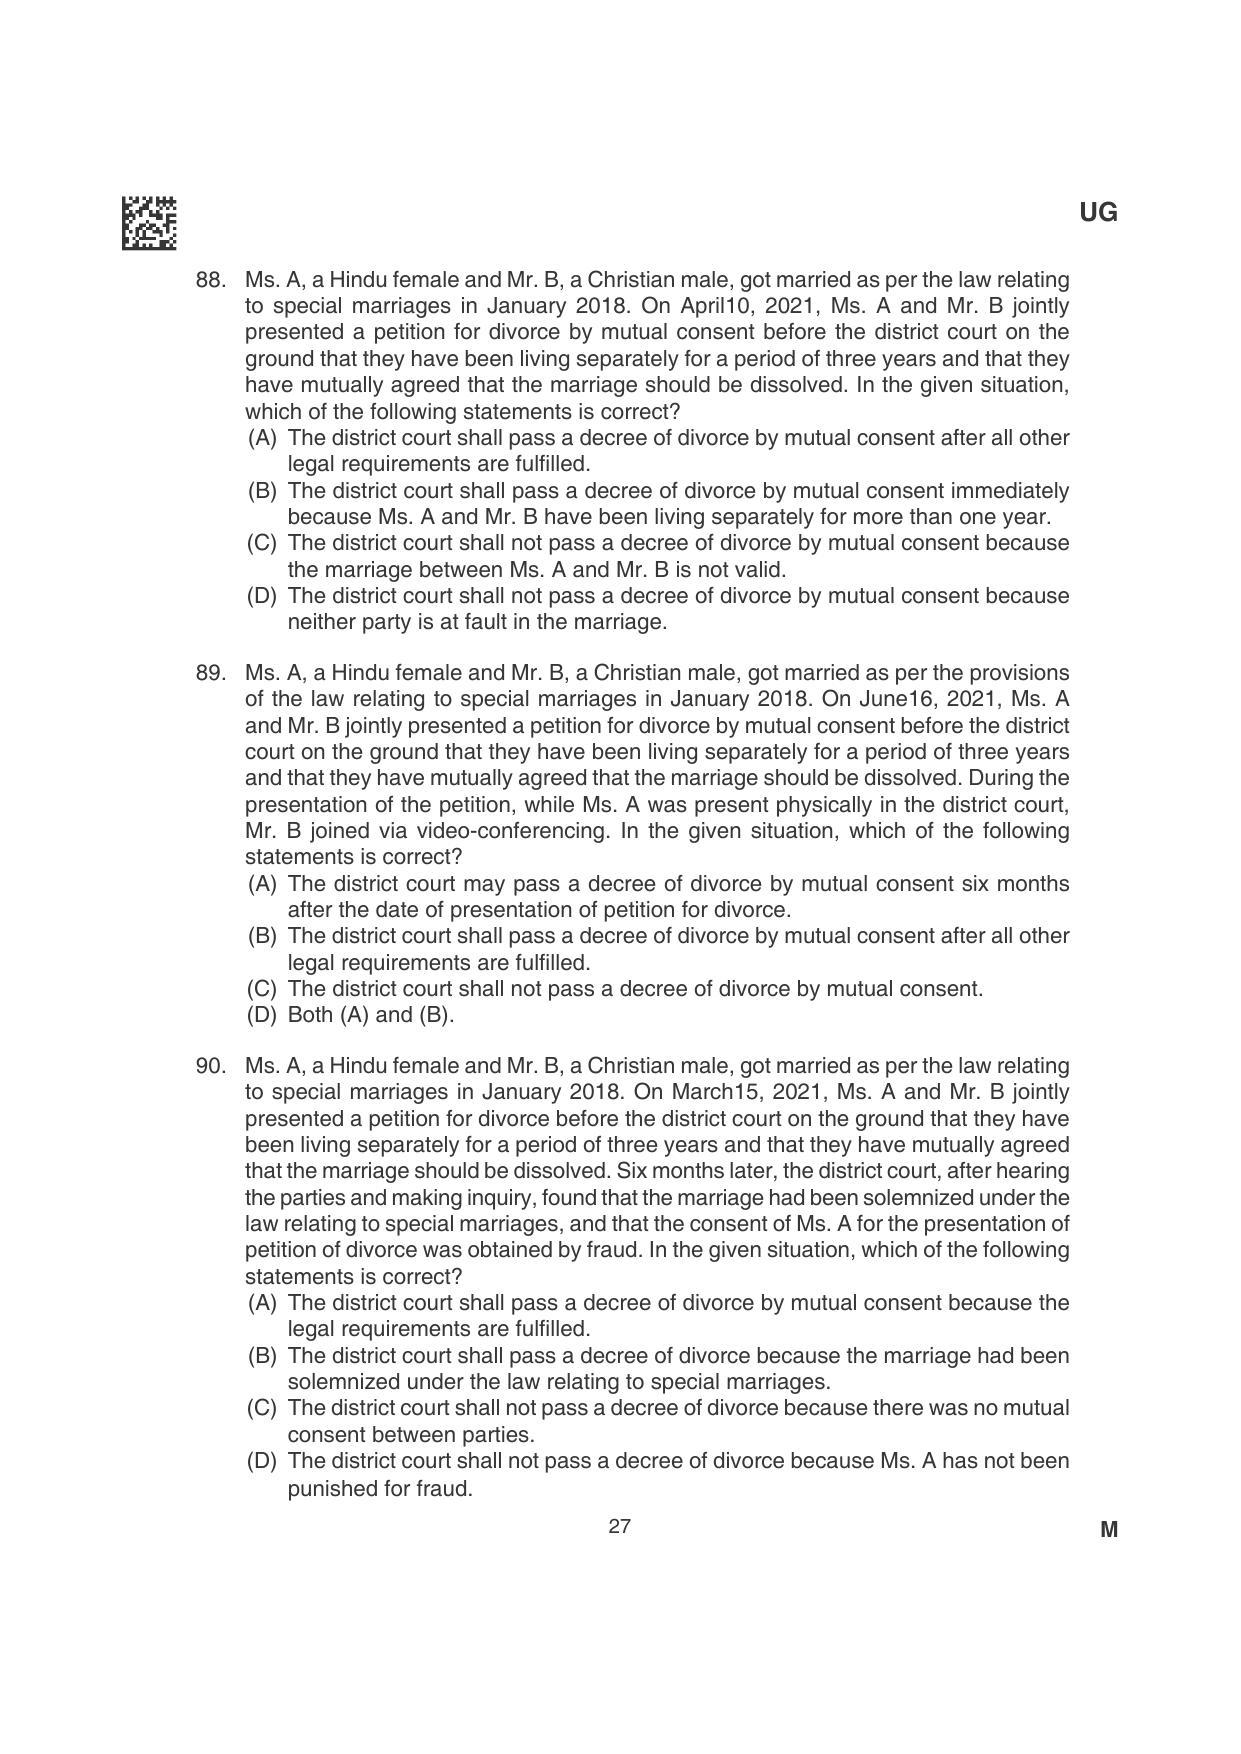 CLAT 2022 UG Question Papers - Page 27